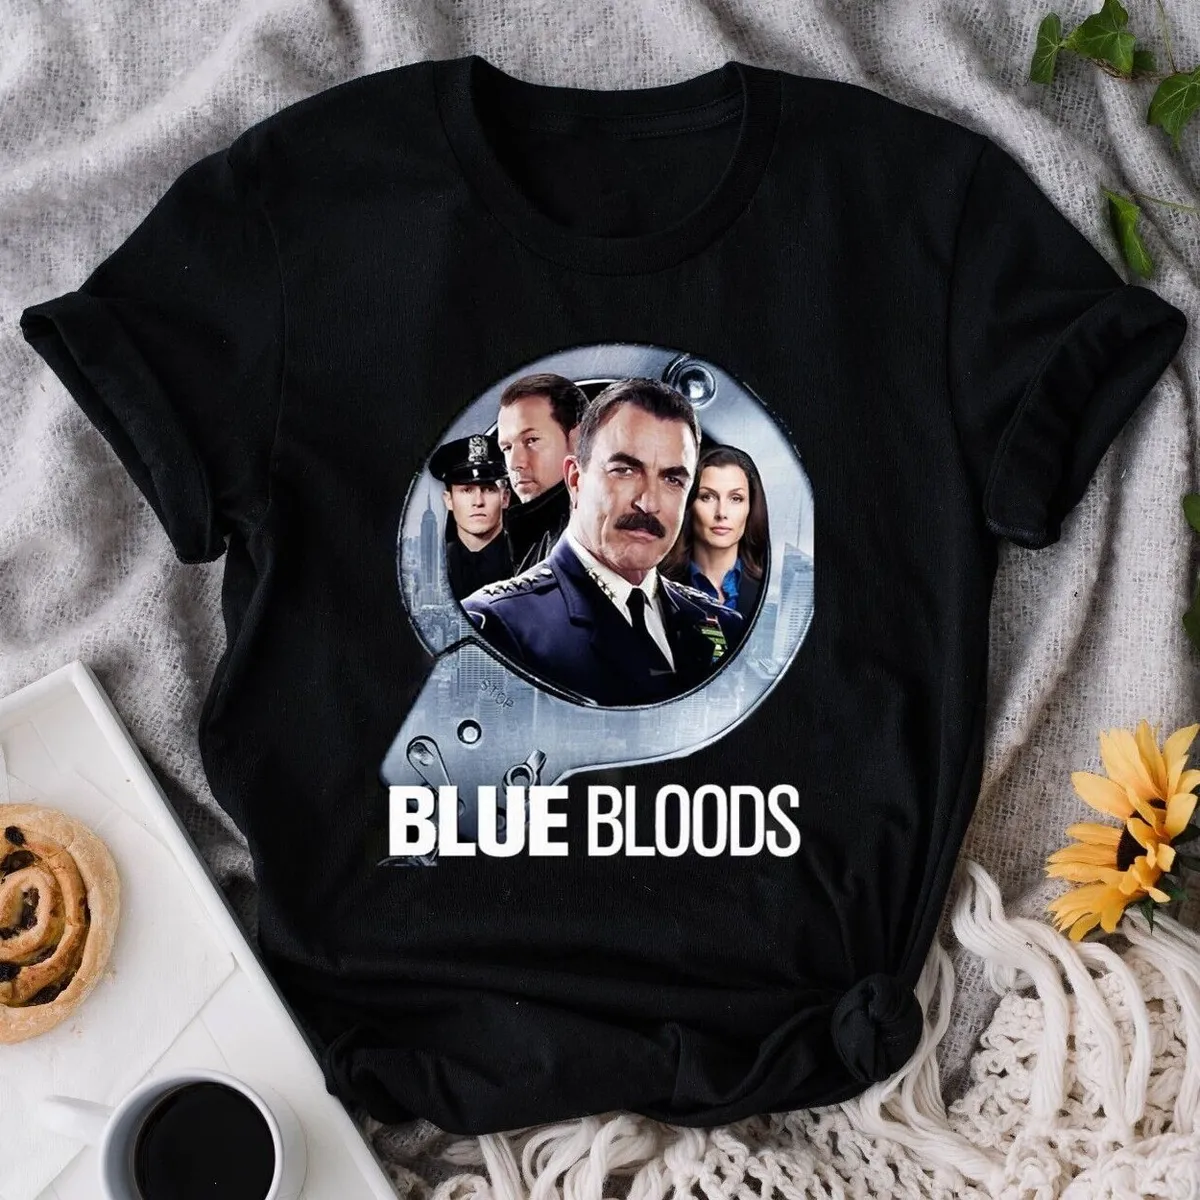 Fan Reagan Wahlberg Blue Selleck Bloods eBay T- Movie Shirt Gift Cop Tom Donnie Family |